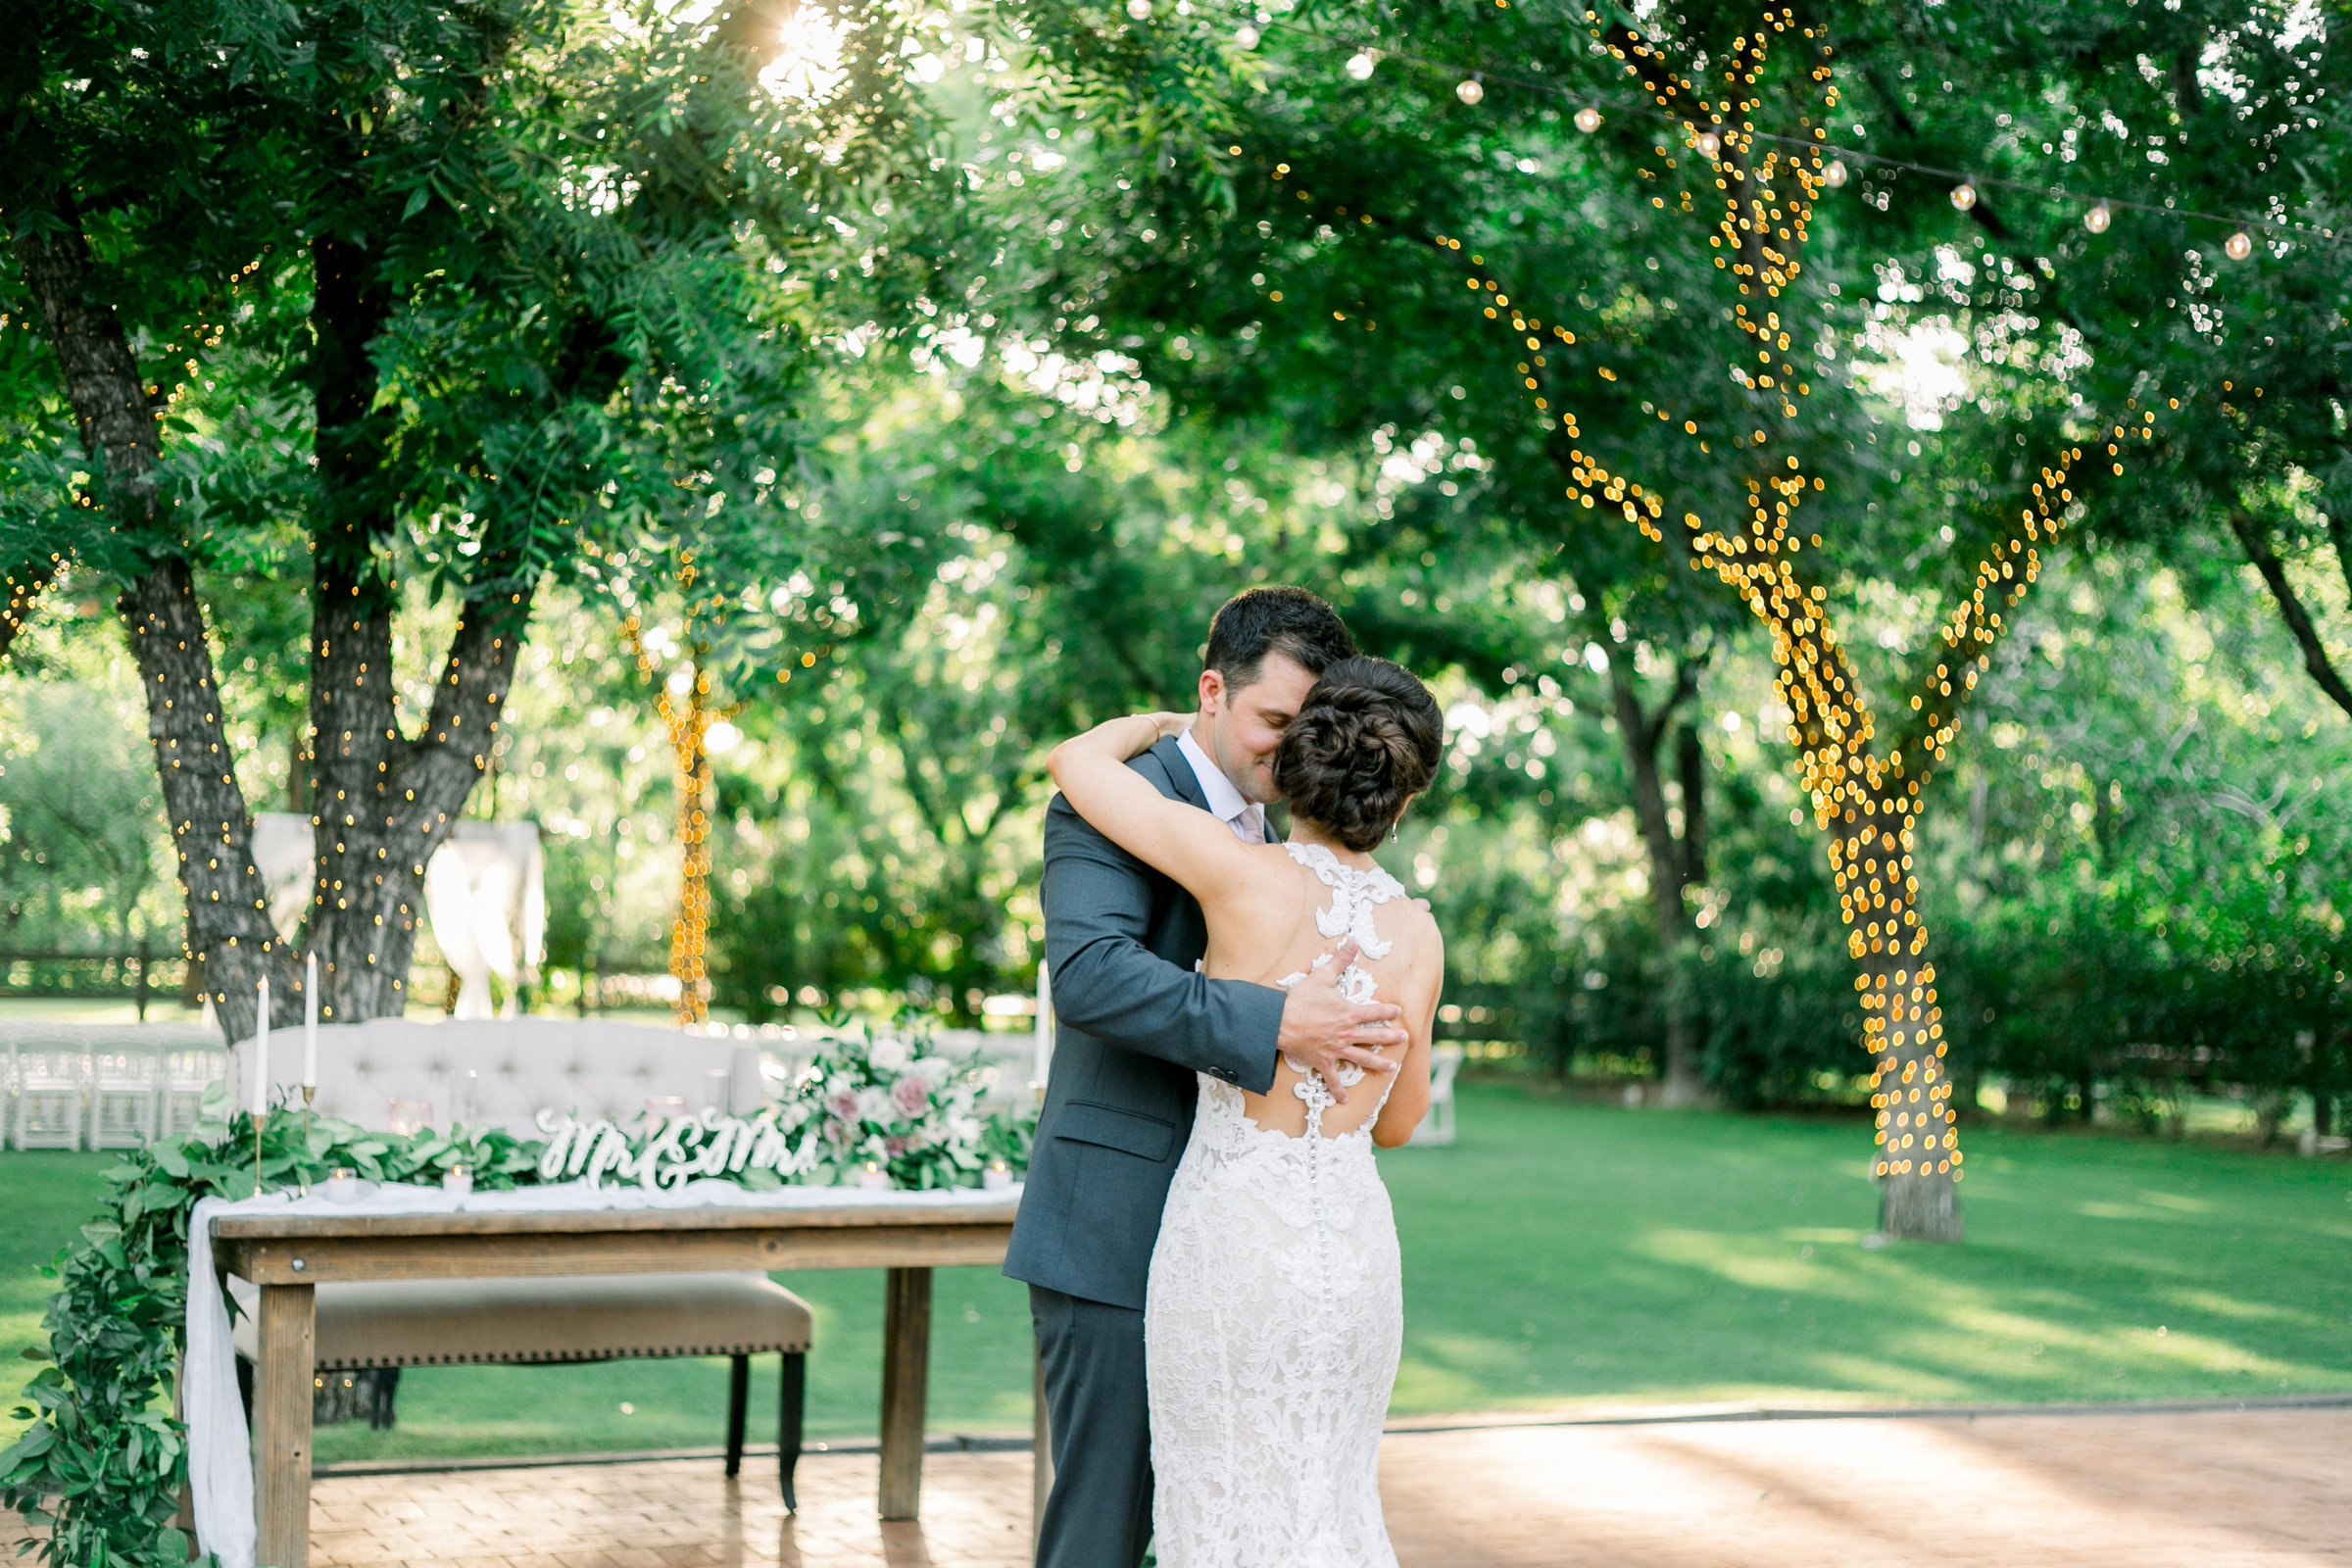 Karlie Colleen Photography - Venue At The Grove - Arizona Wedding - Maggie & Grant -98